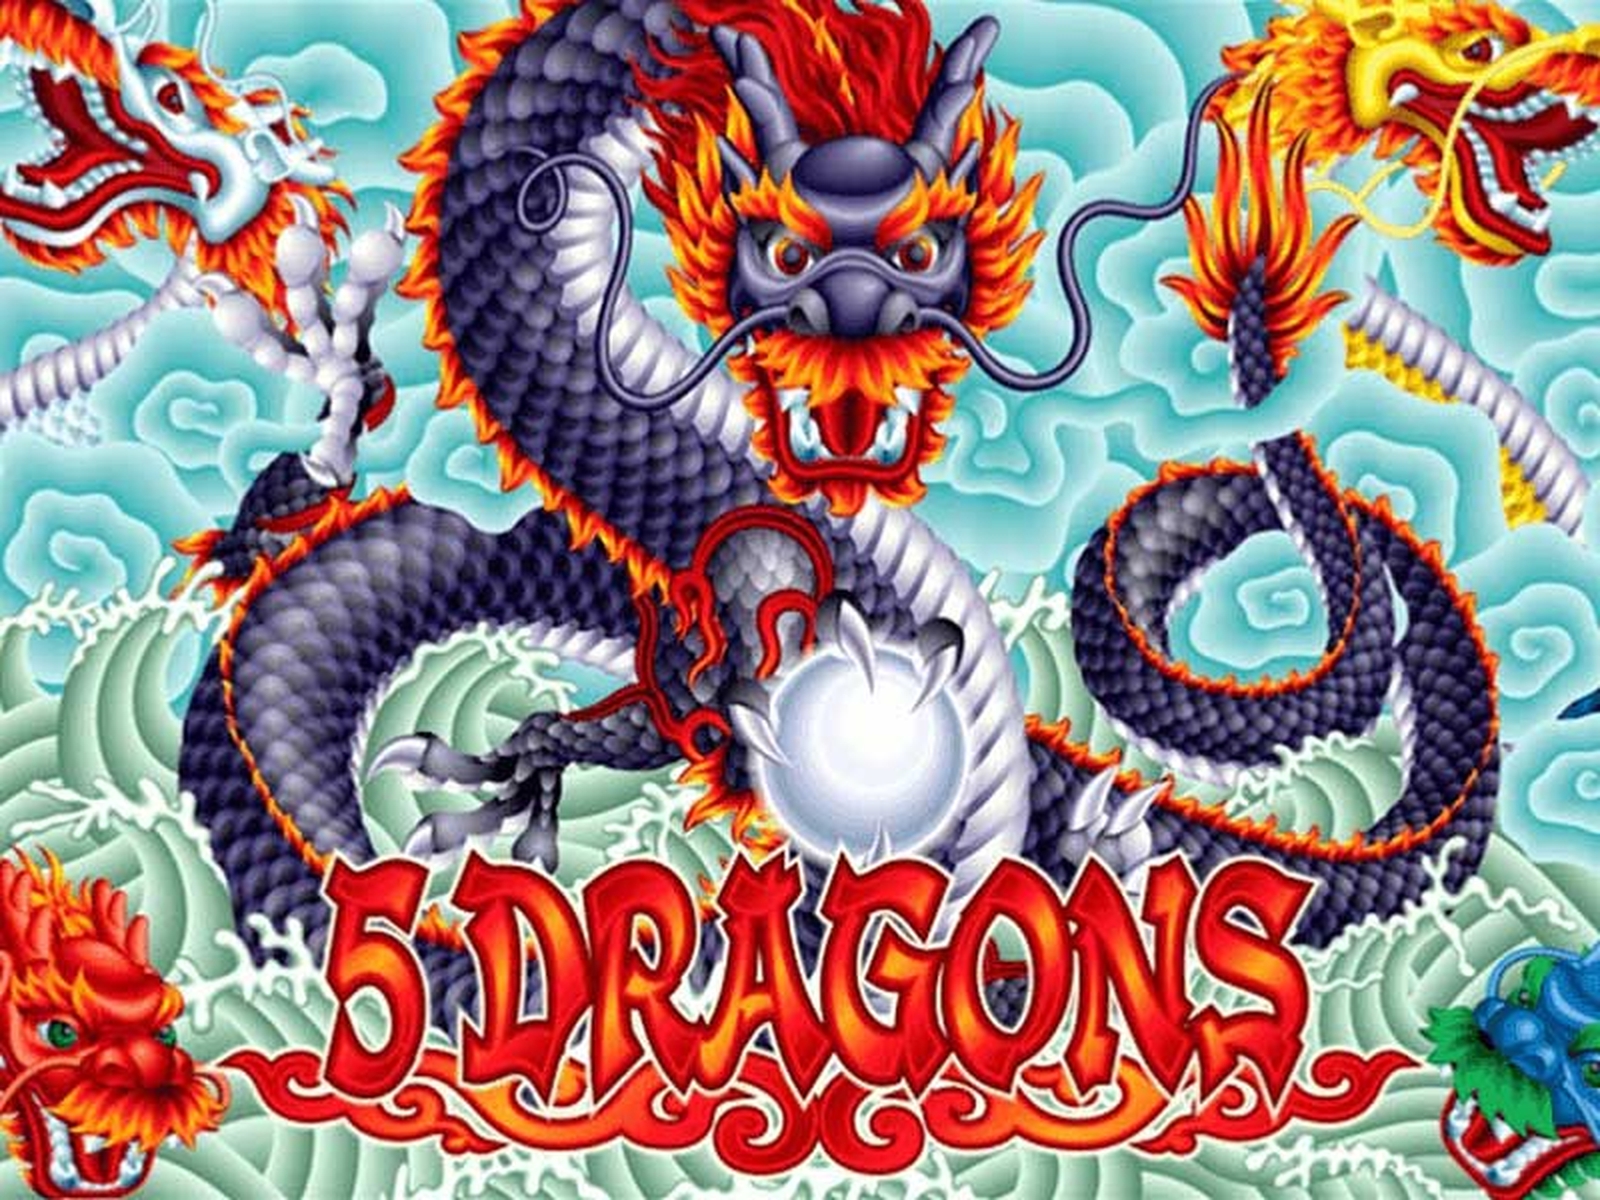 5 dragon slot machine free download android